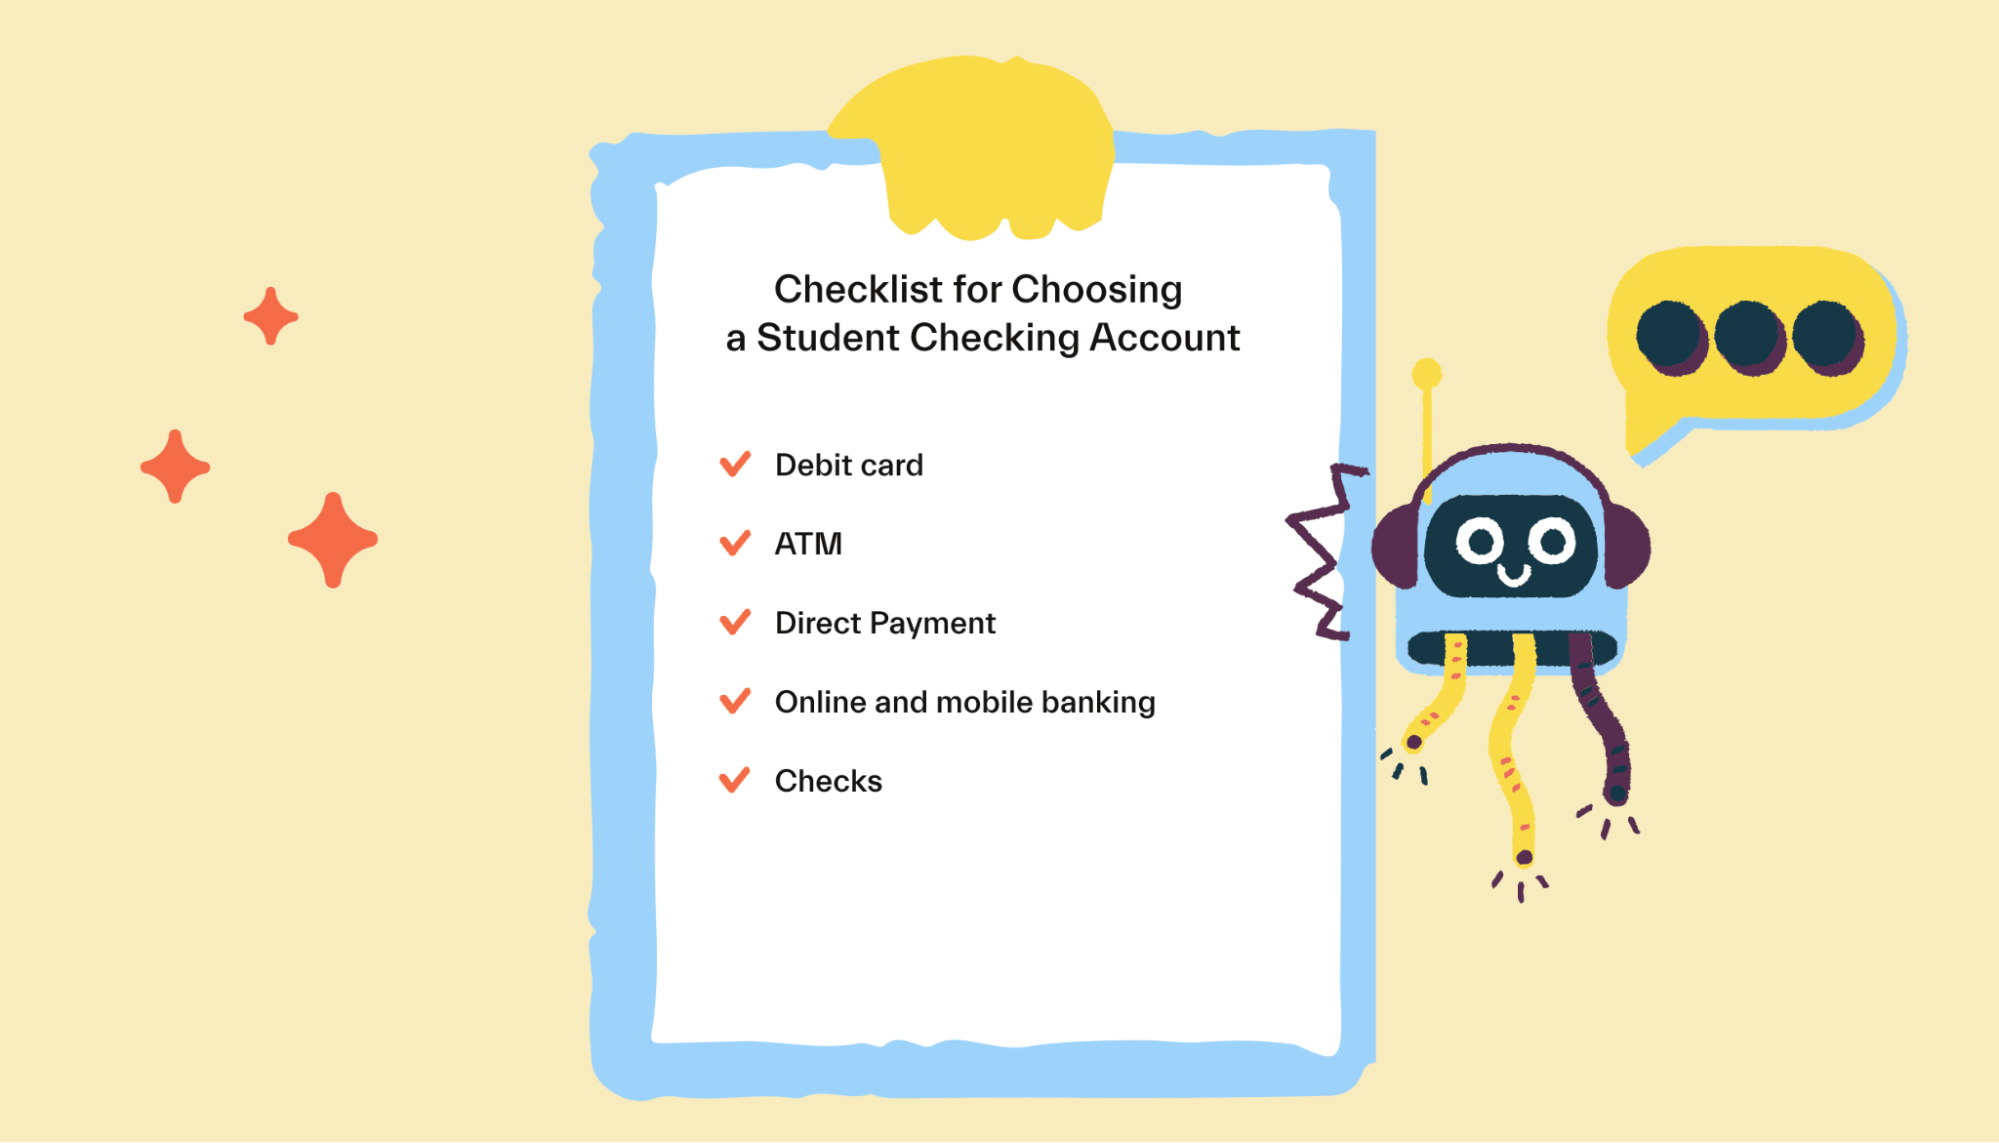 Common Features of Student Checking Accounts